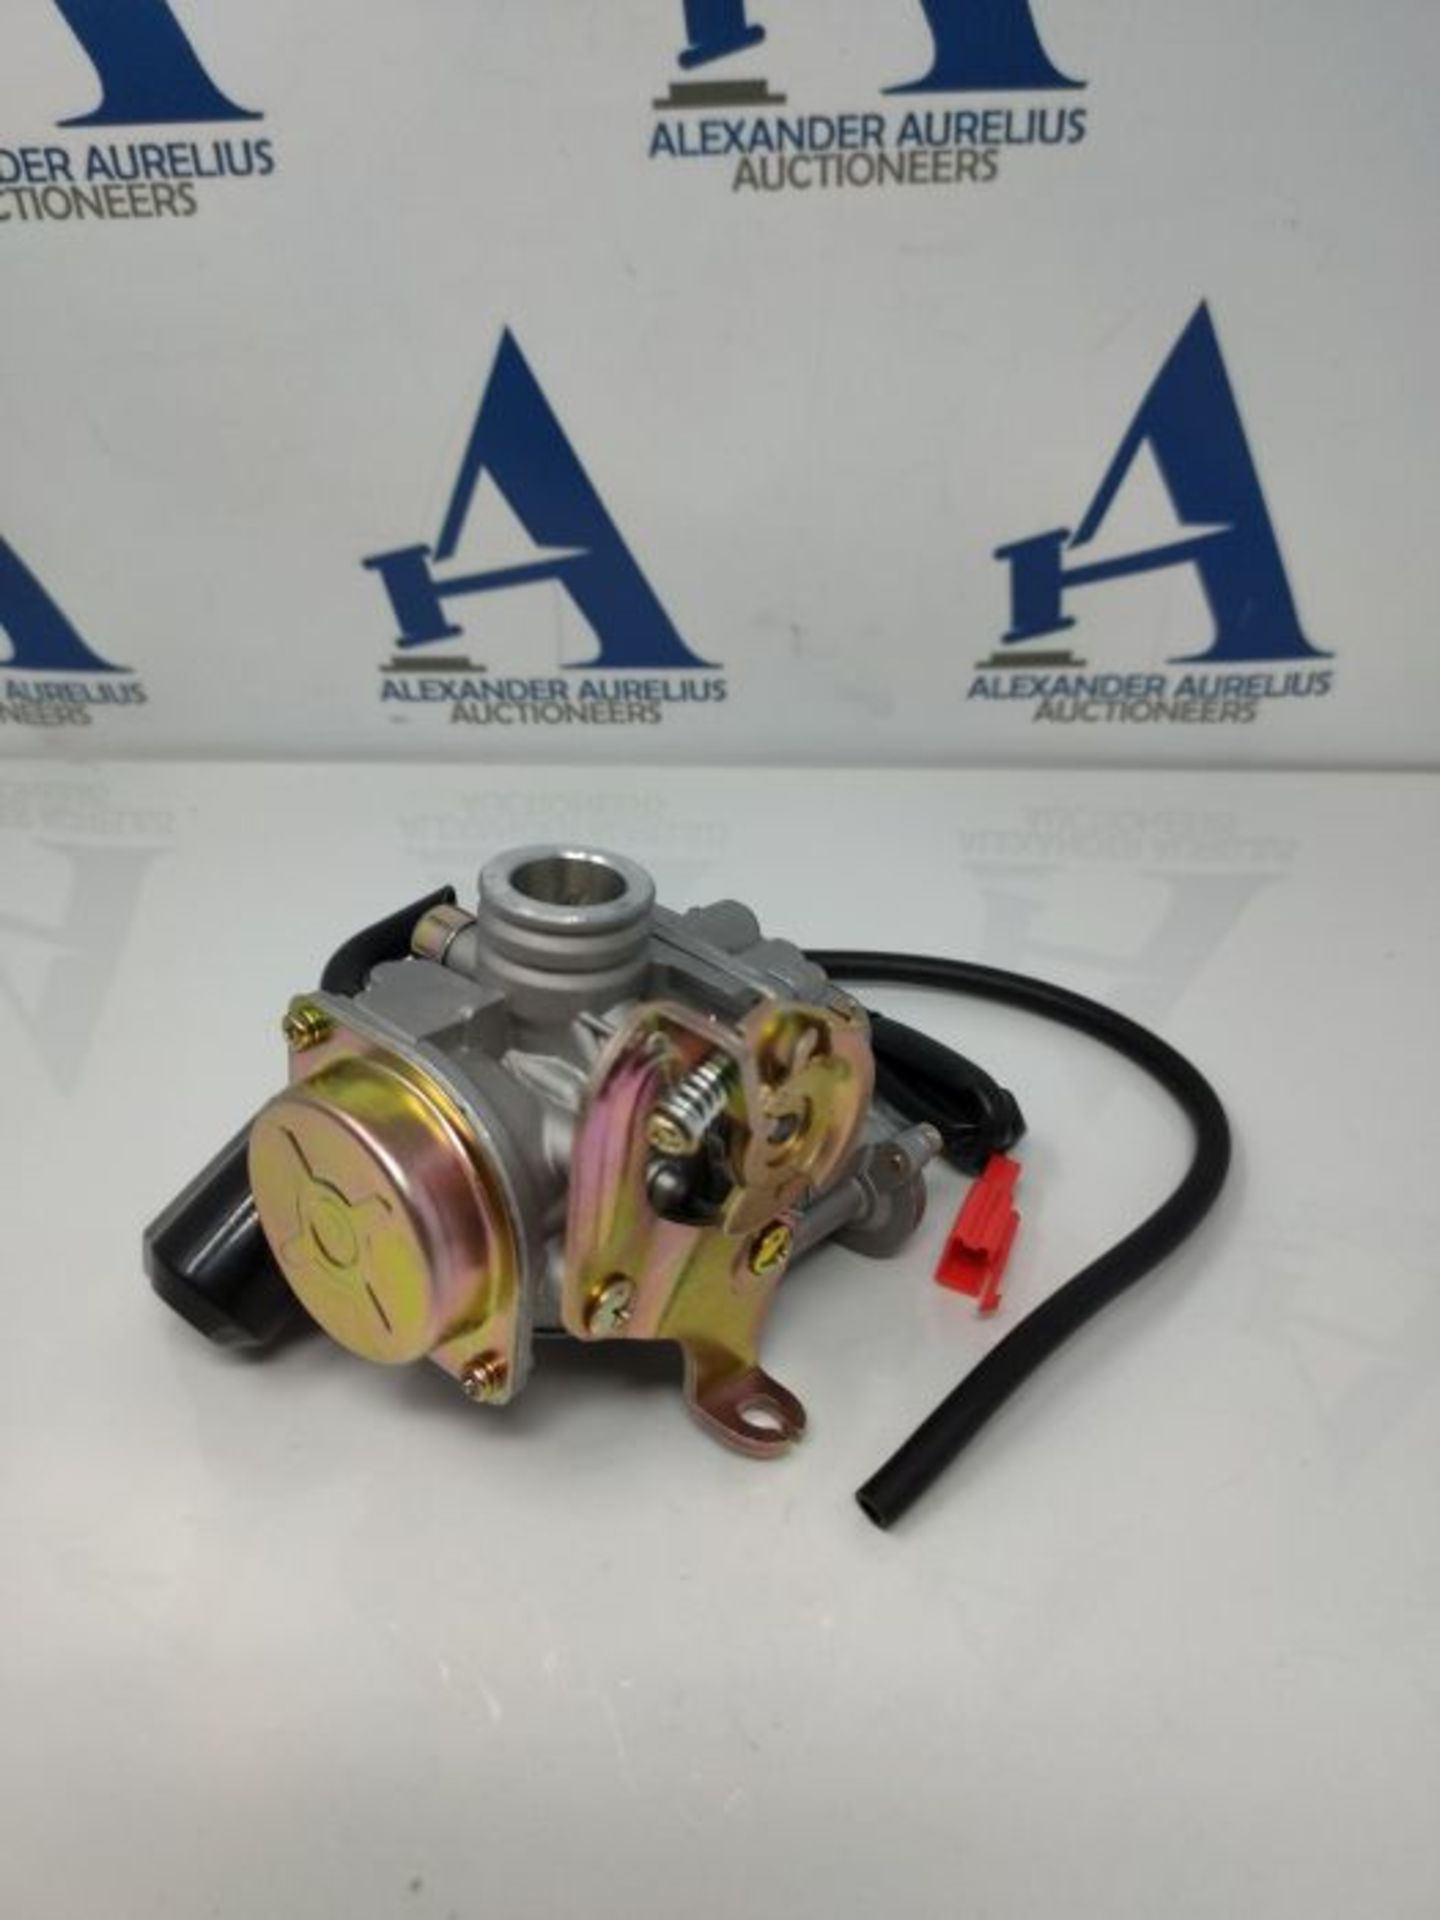 Beehive Filter Aftermarket Carb Carburetor for Scooter 50cc Chinese GY6 139QMB Moped 4